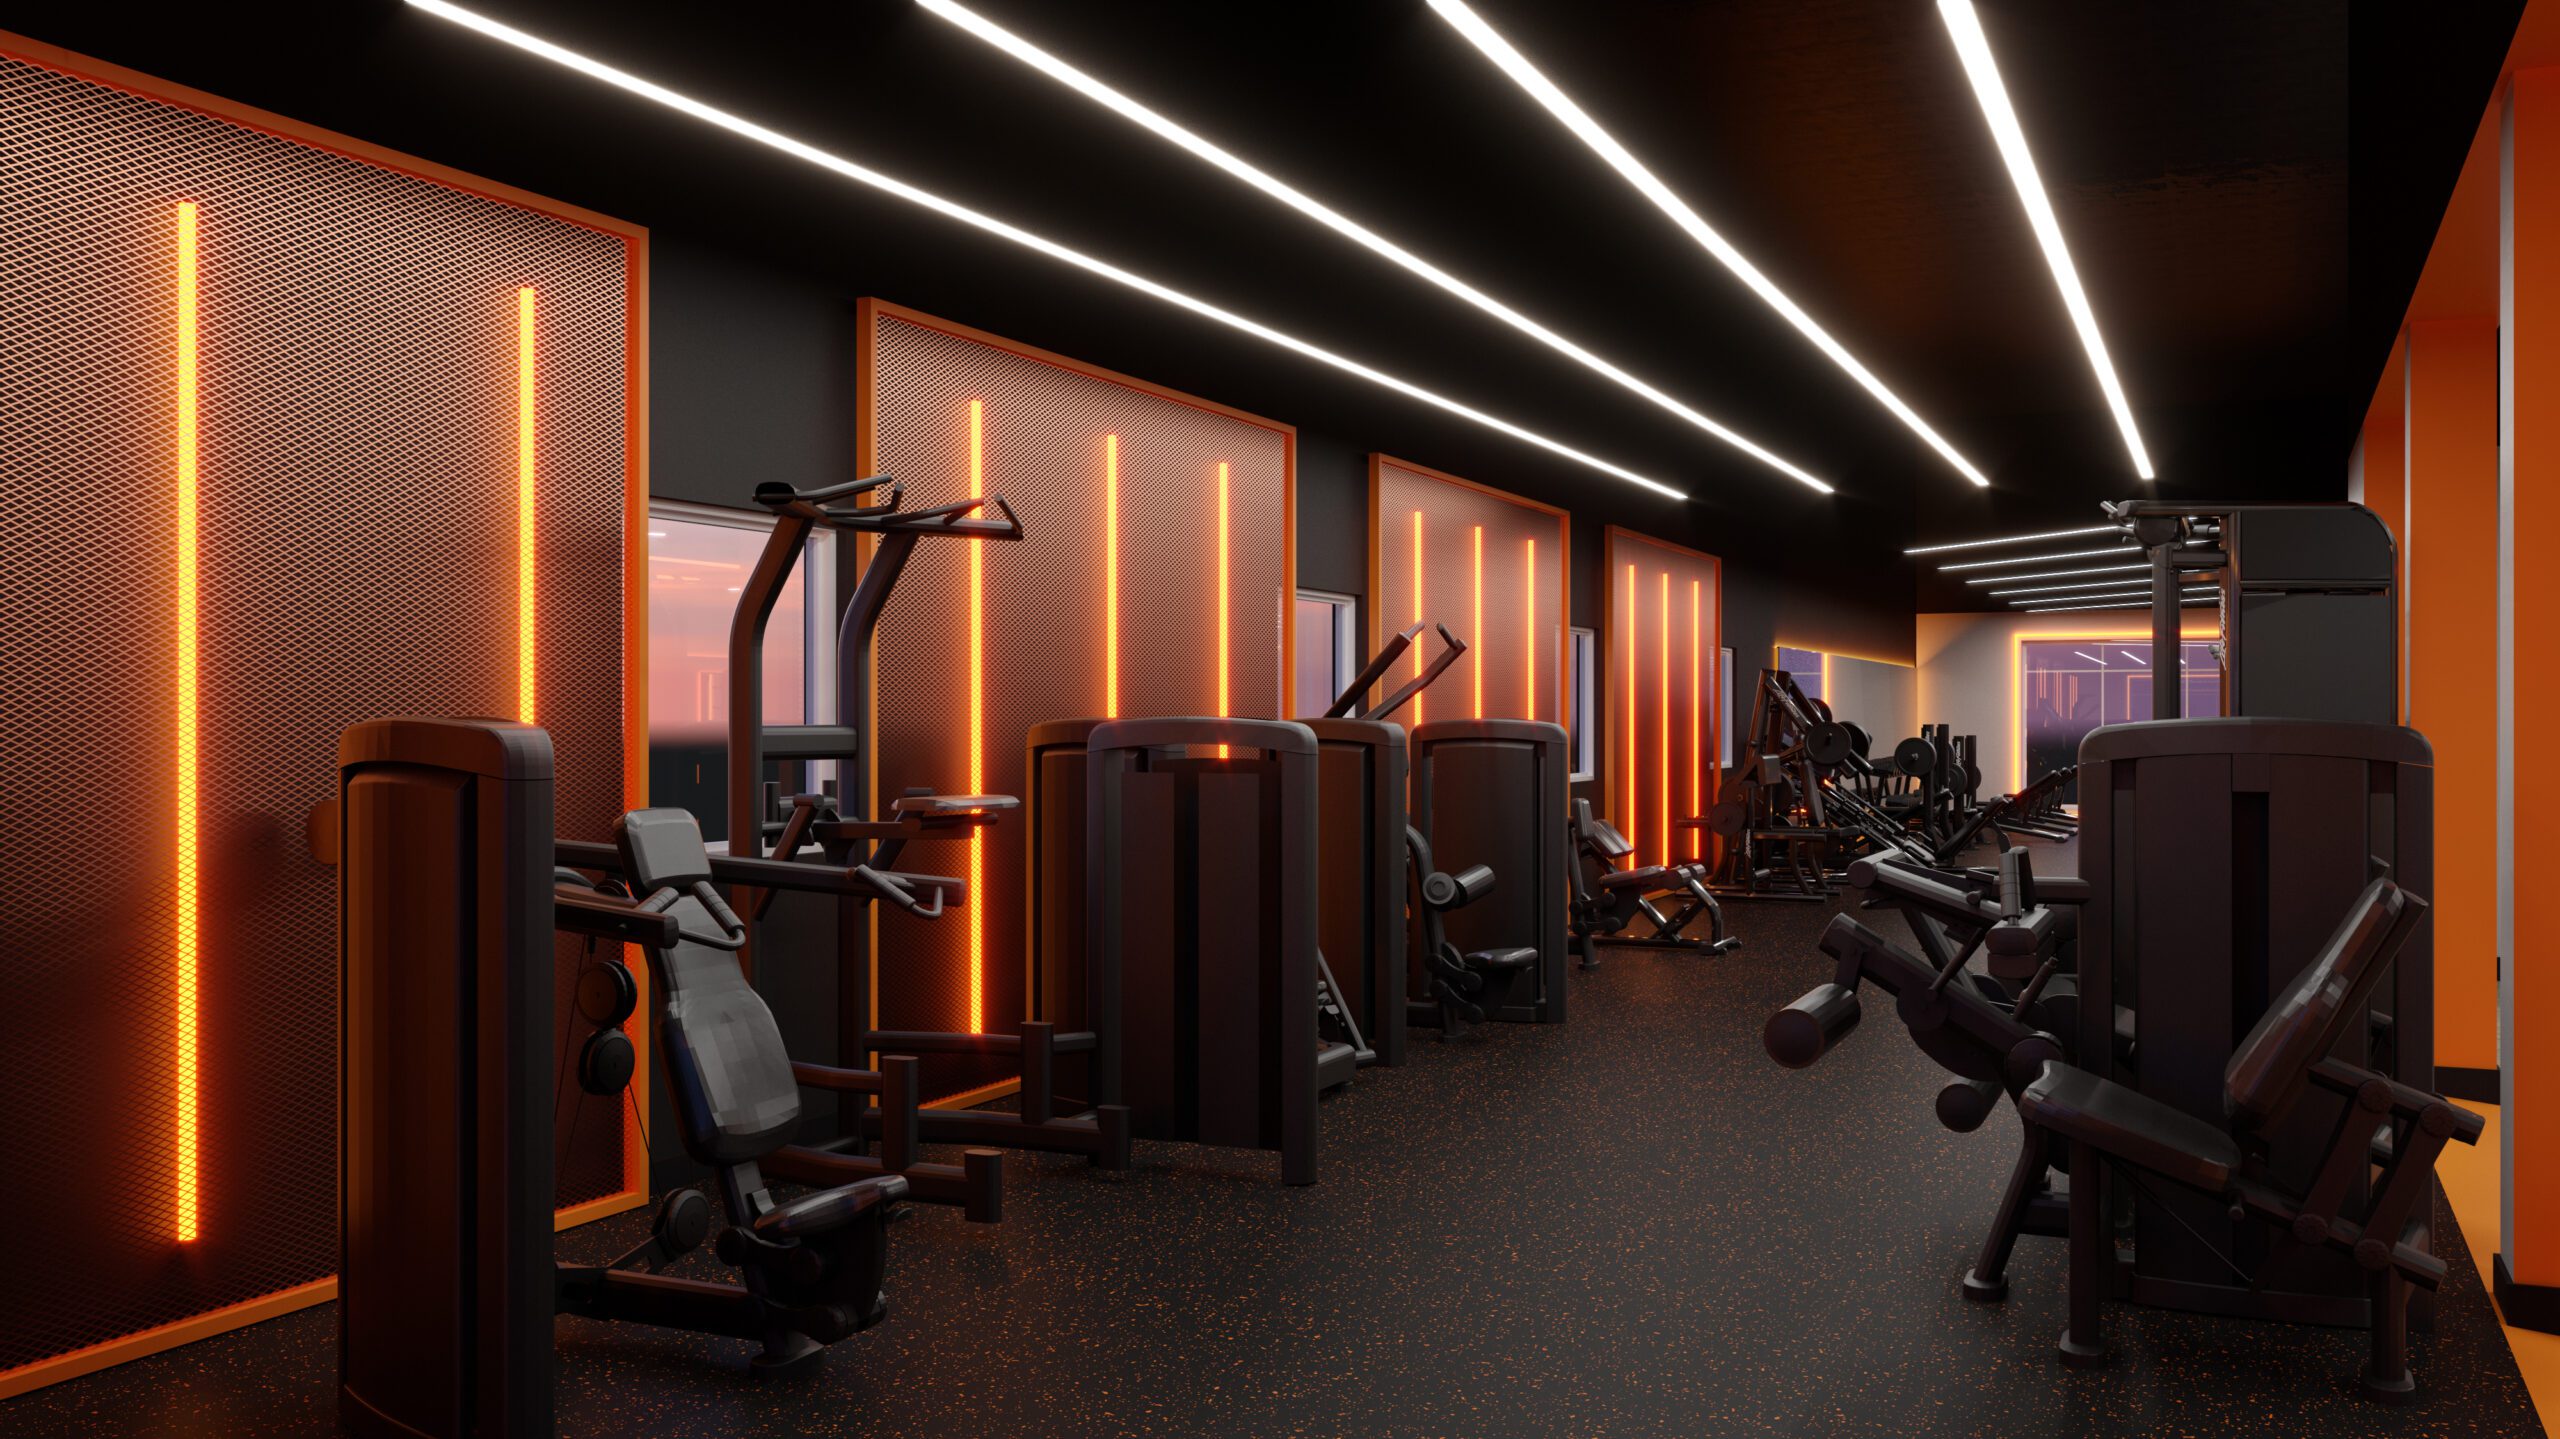 Fusion gym interior design and architecture with equipment